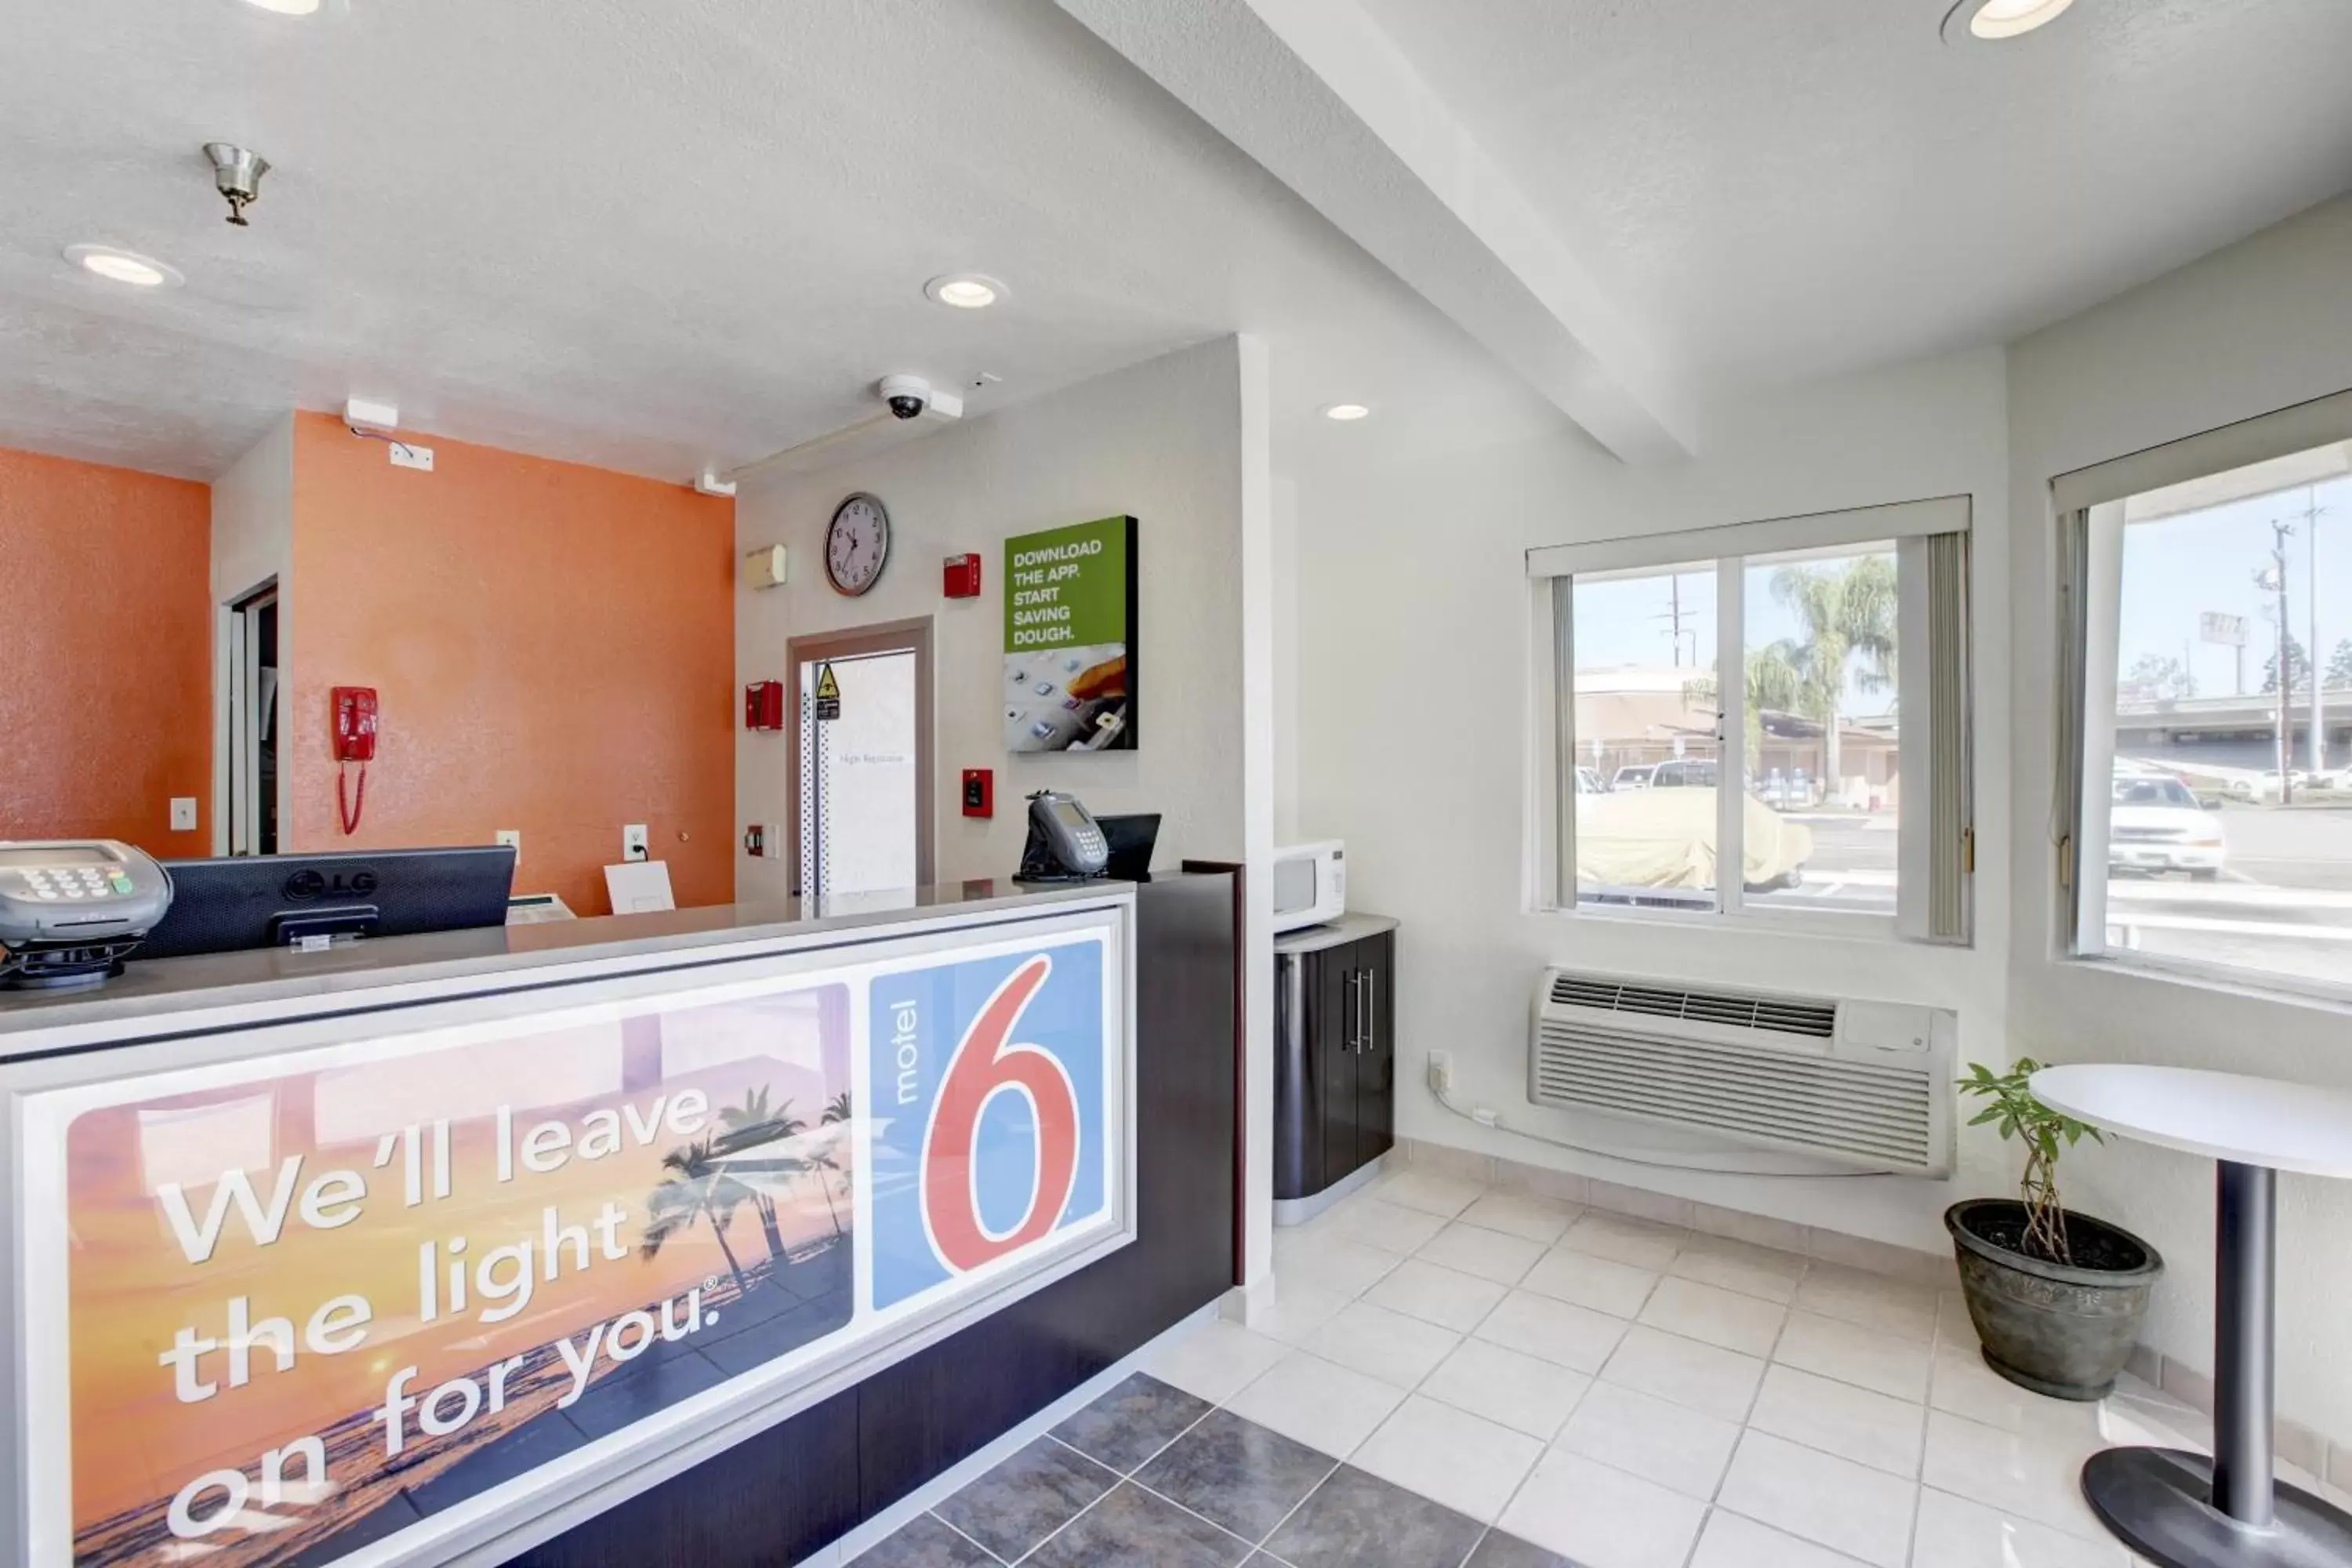 Lobby or reception in Motel 6-Westminster, CA - North